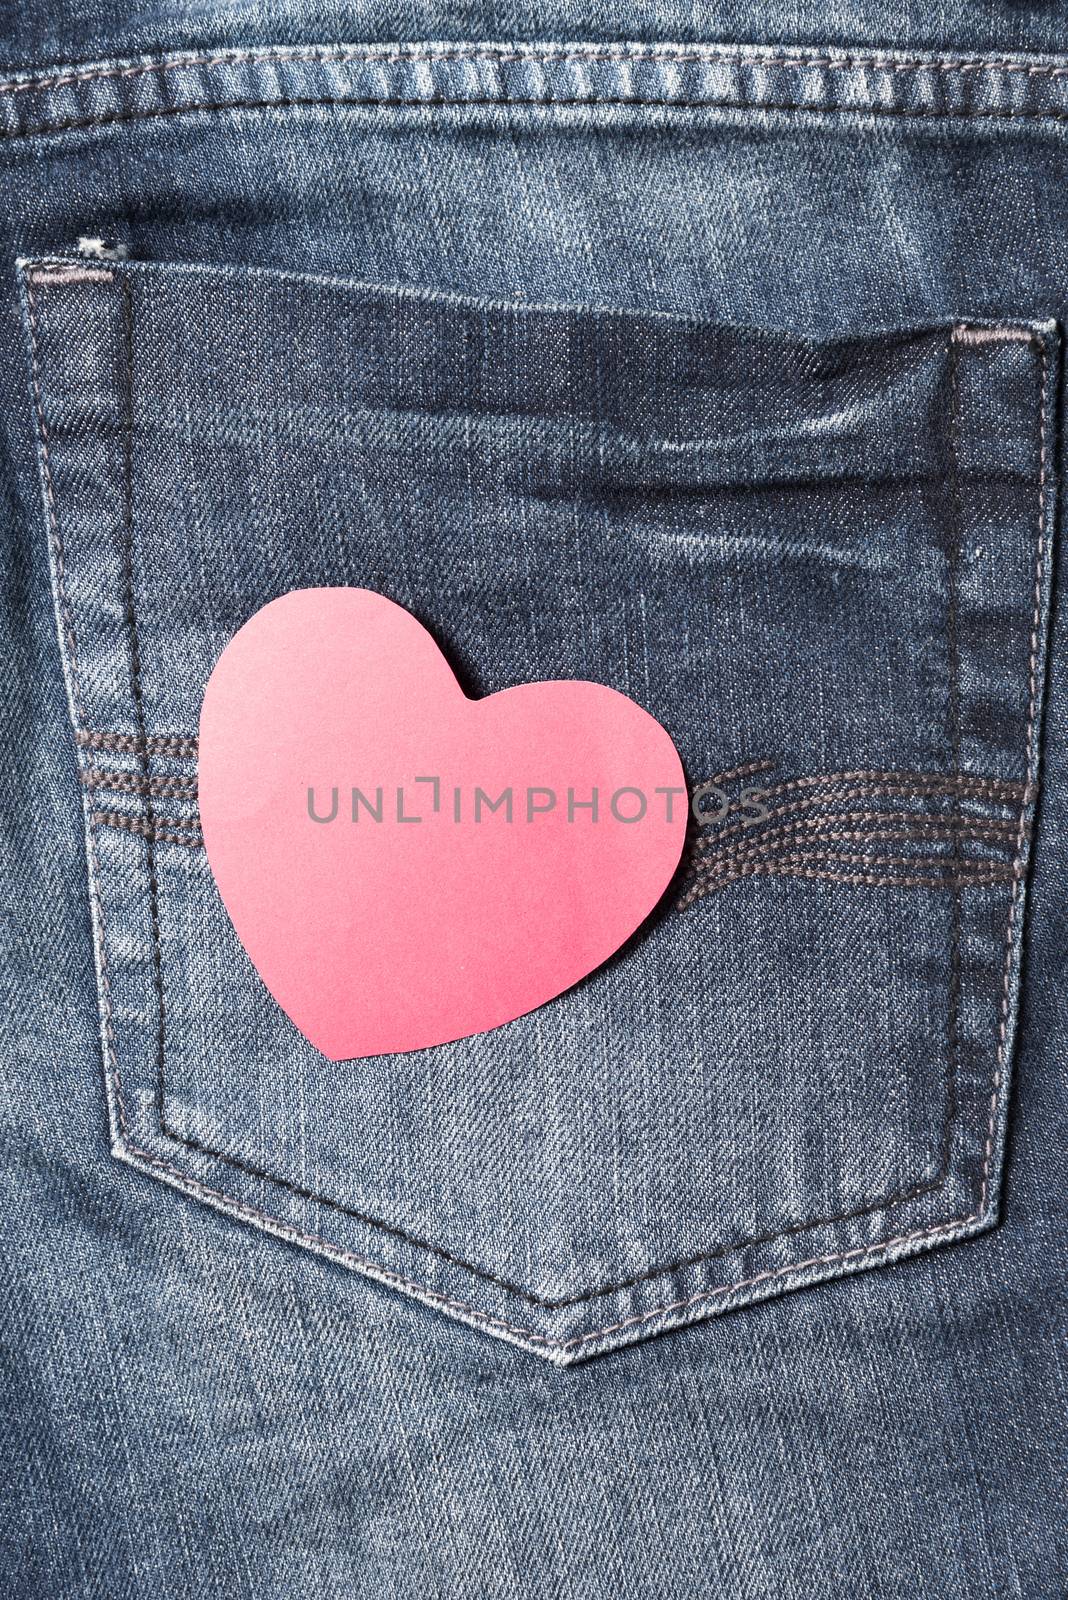 red heart on jean